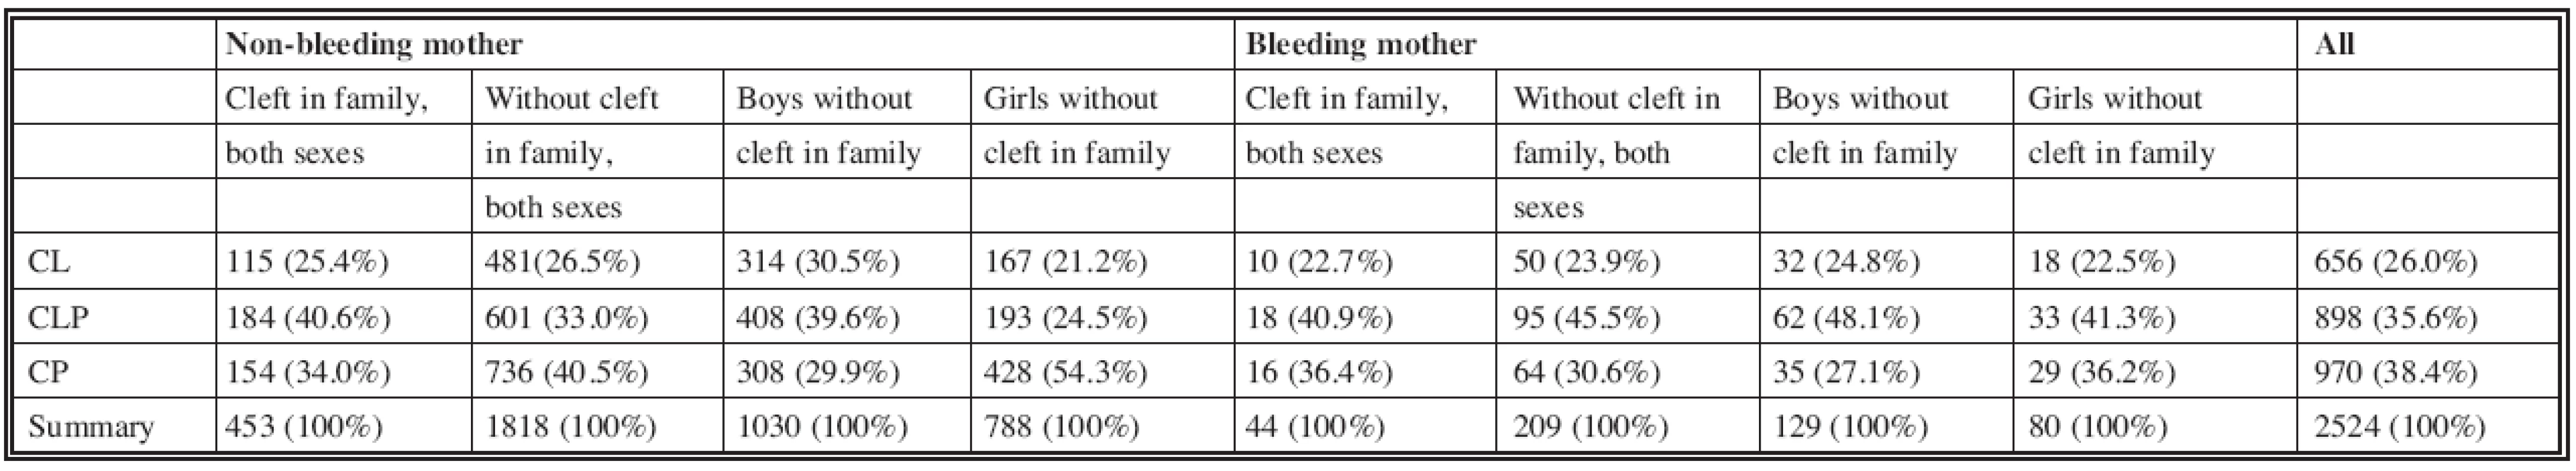 Number and percent of three basic types of cleft compared between non-bleeding and bleeding mothers, divided according cleft among relatives of child, the childern without cleft among relatives then sorted according to gender